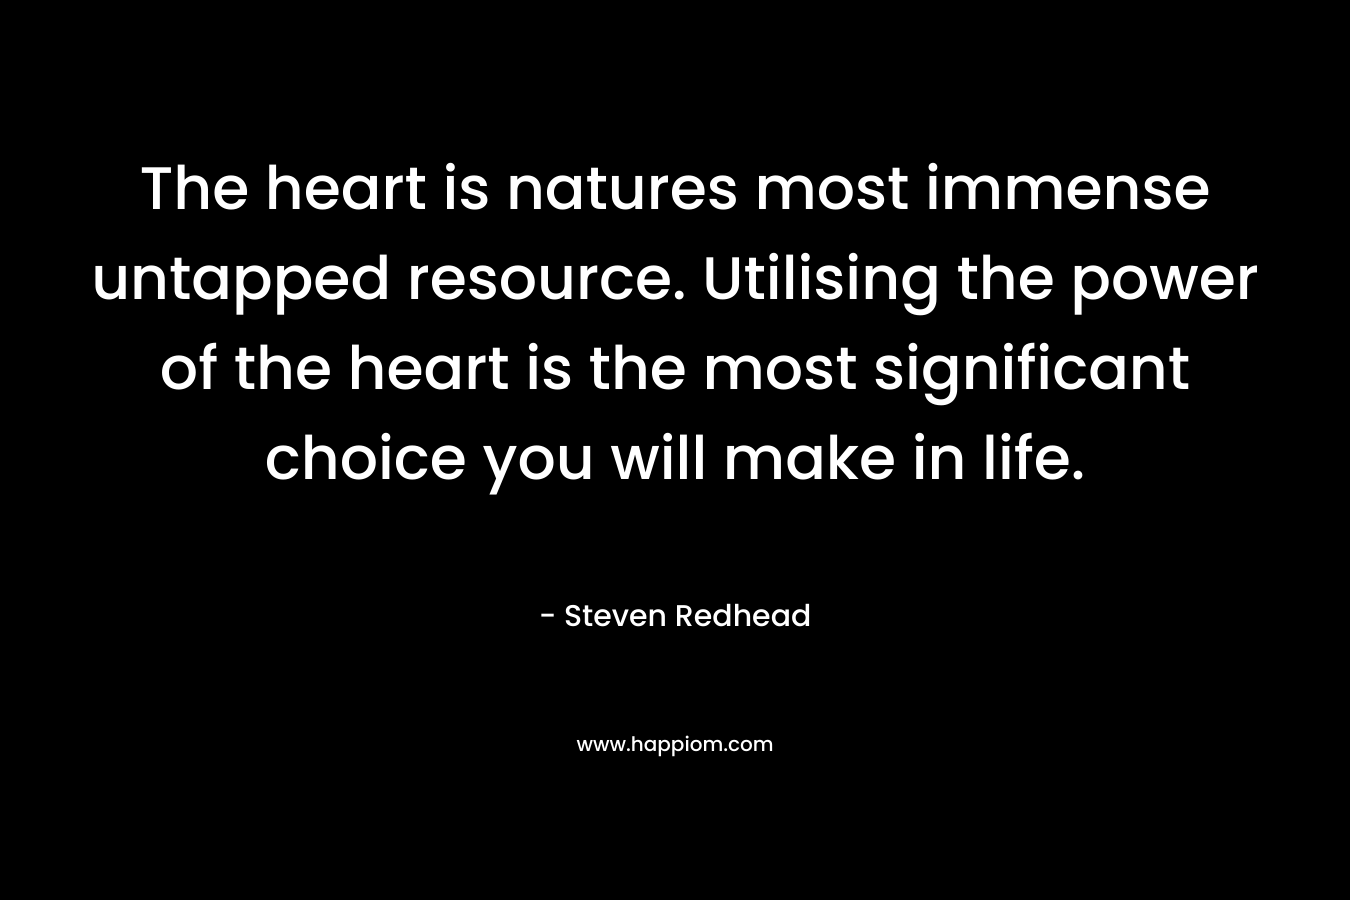 The heart is natures most immense untapped resource. Utilising the power of the heart is the most significant choice you will make in life. – Steven Redhead